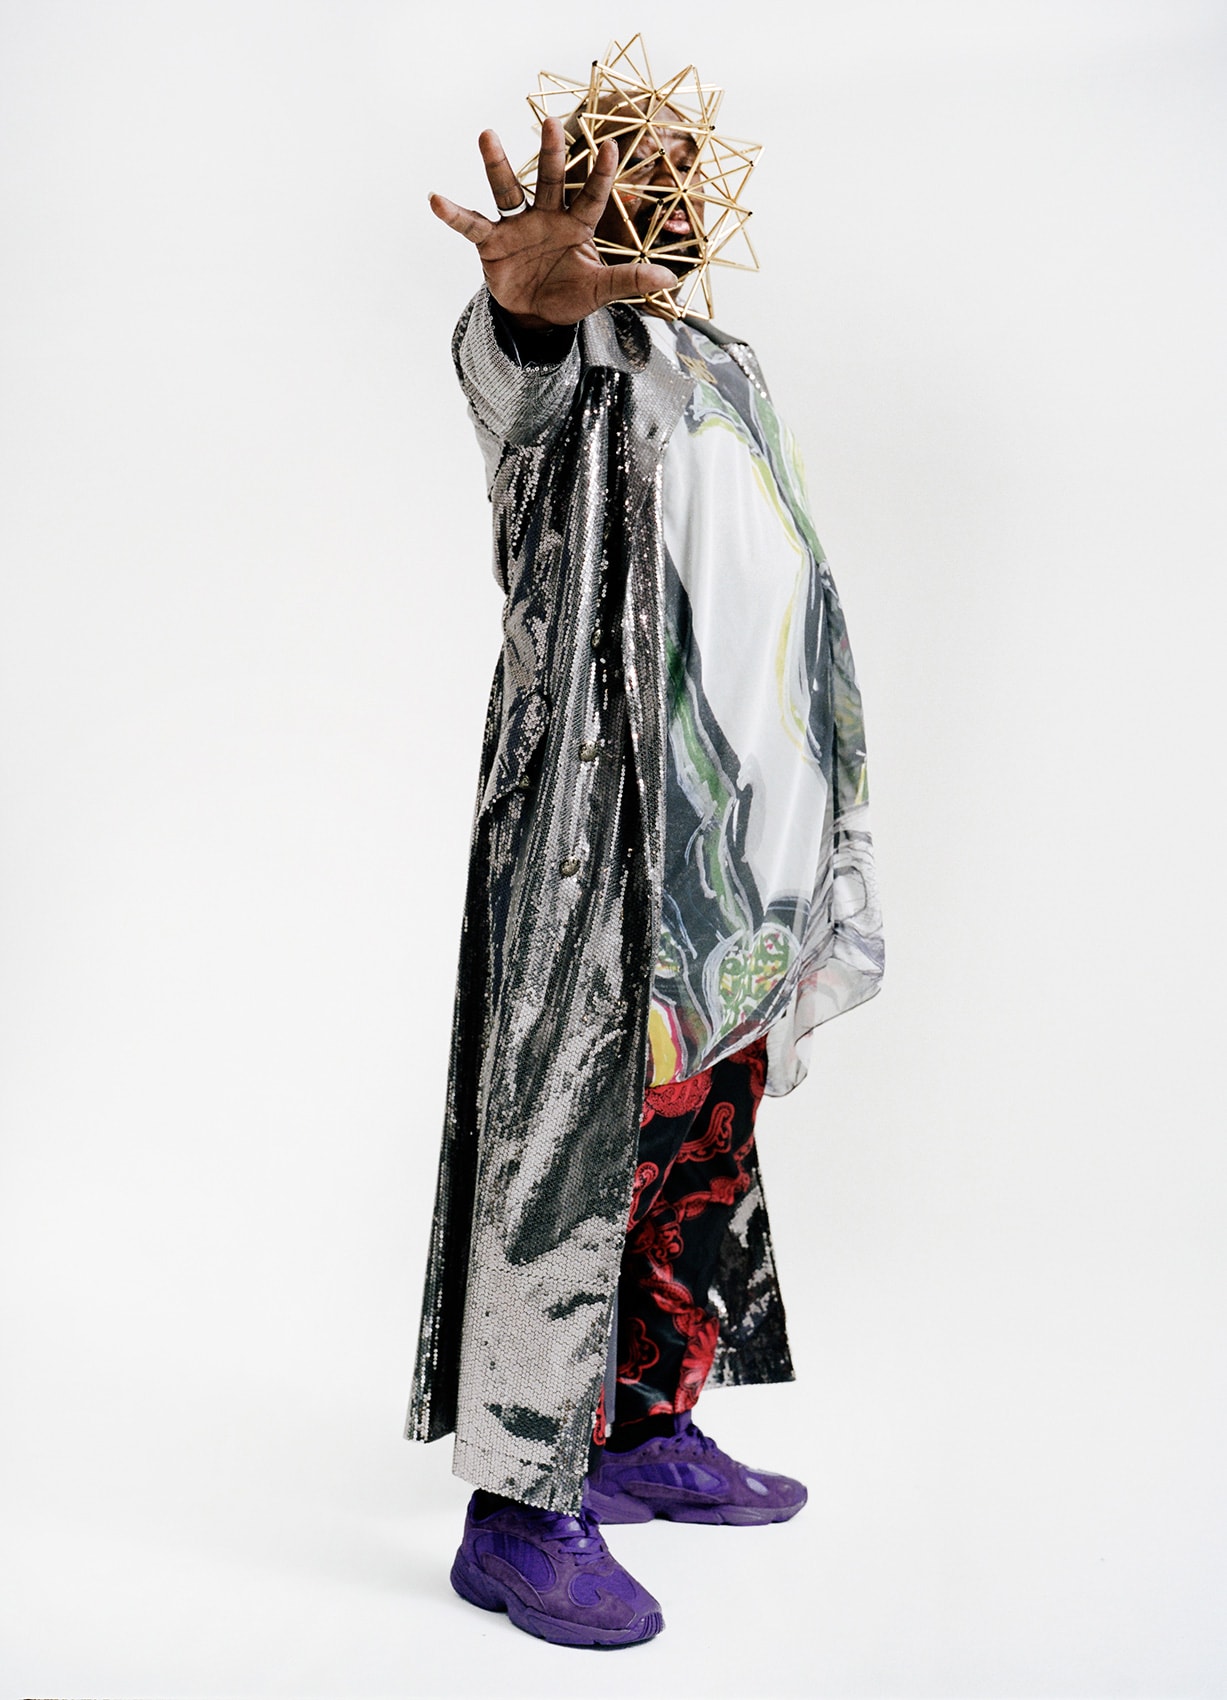 Sneakersnstuff x adidas originals Yung-1 George Clinton campaign photos video shaniqwa jarvis